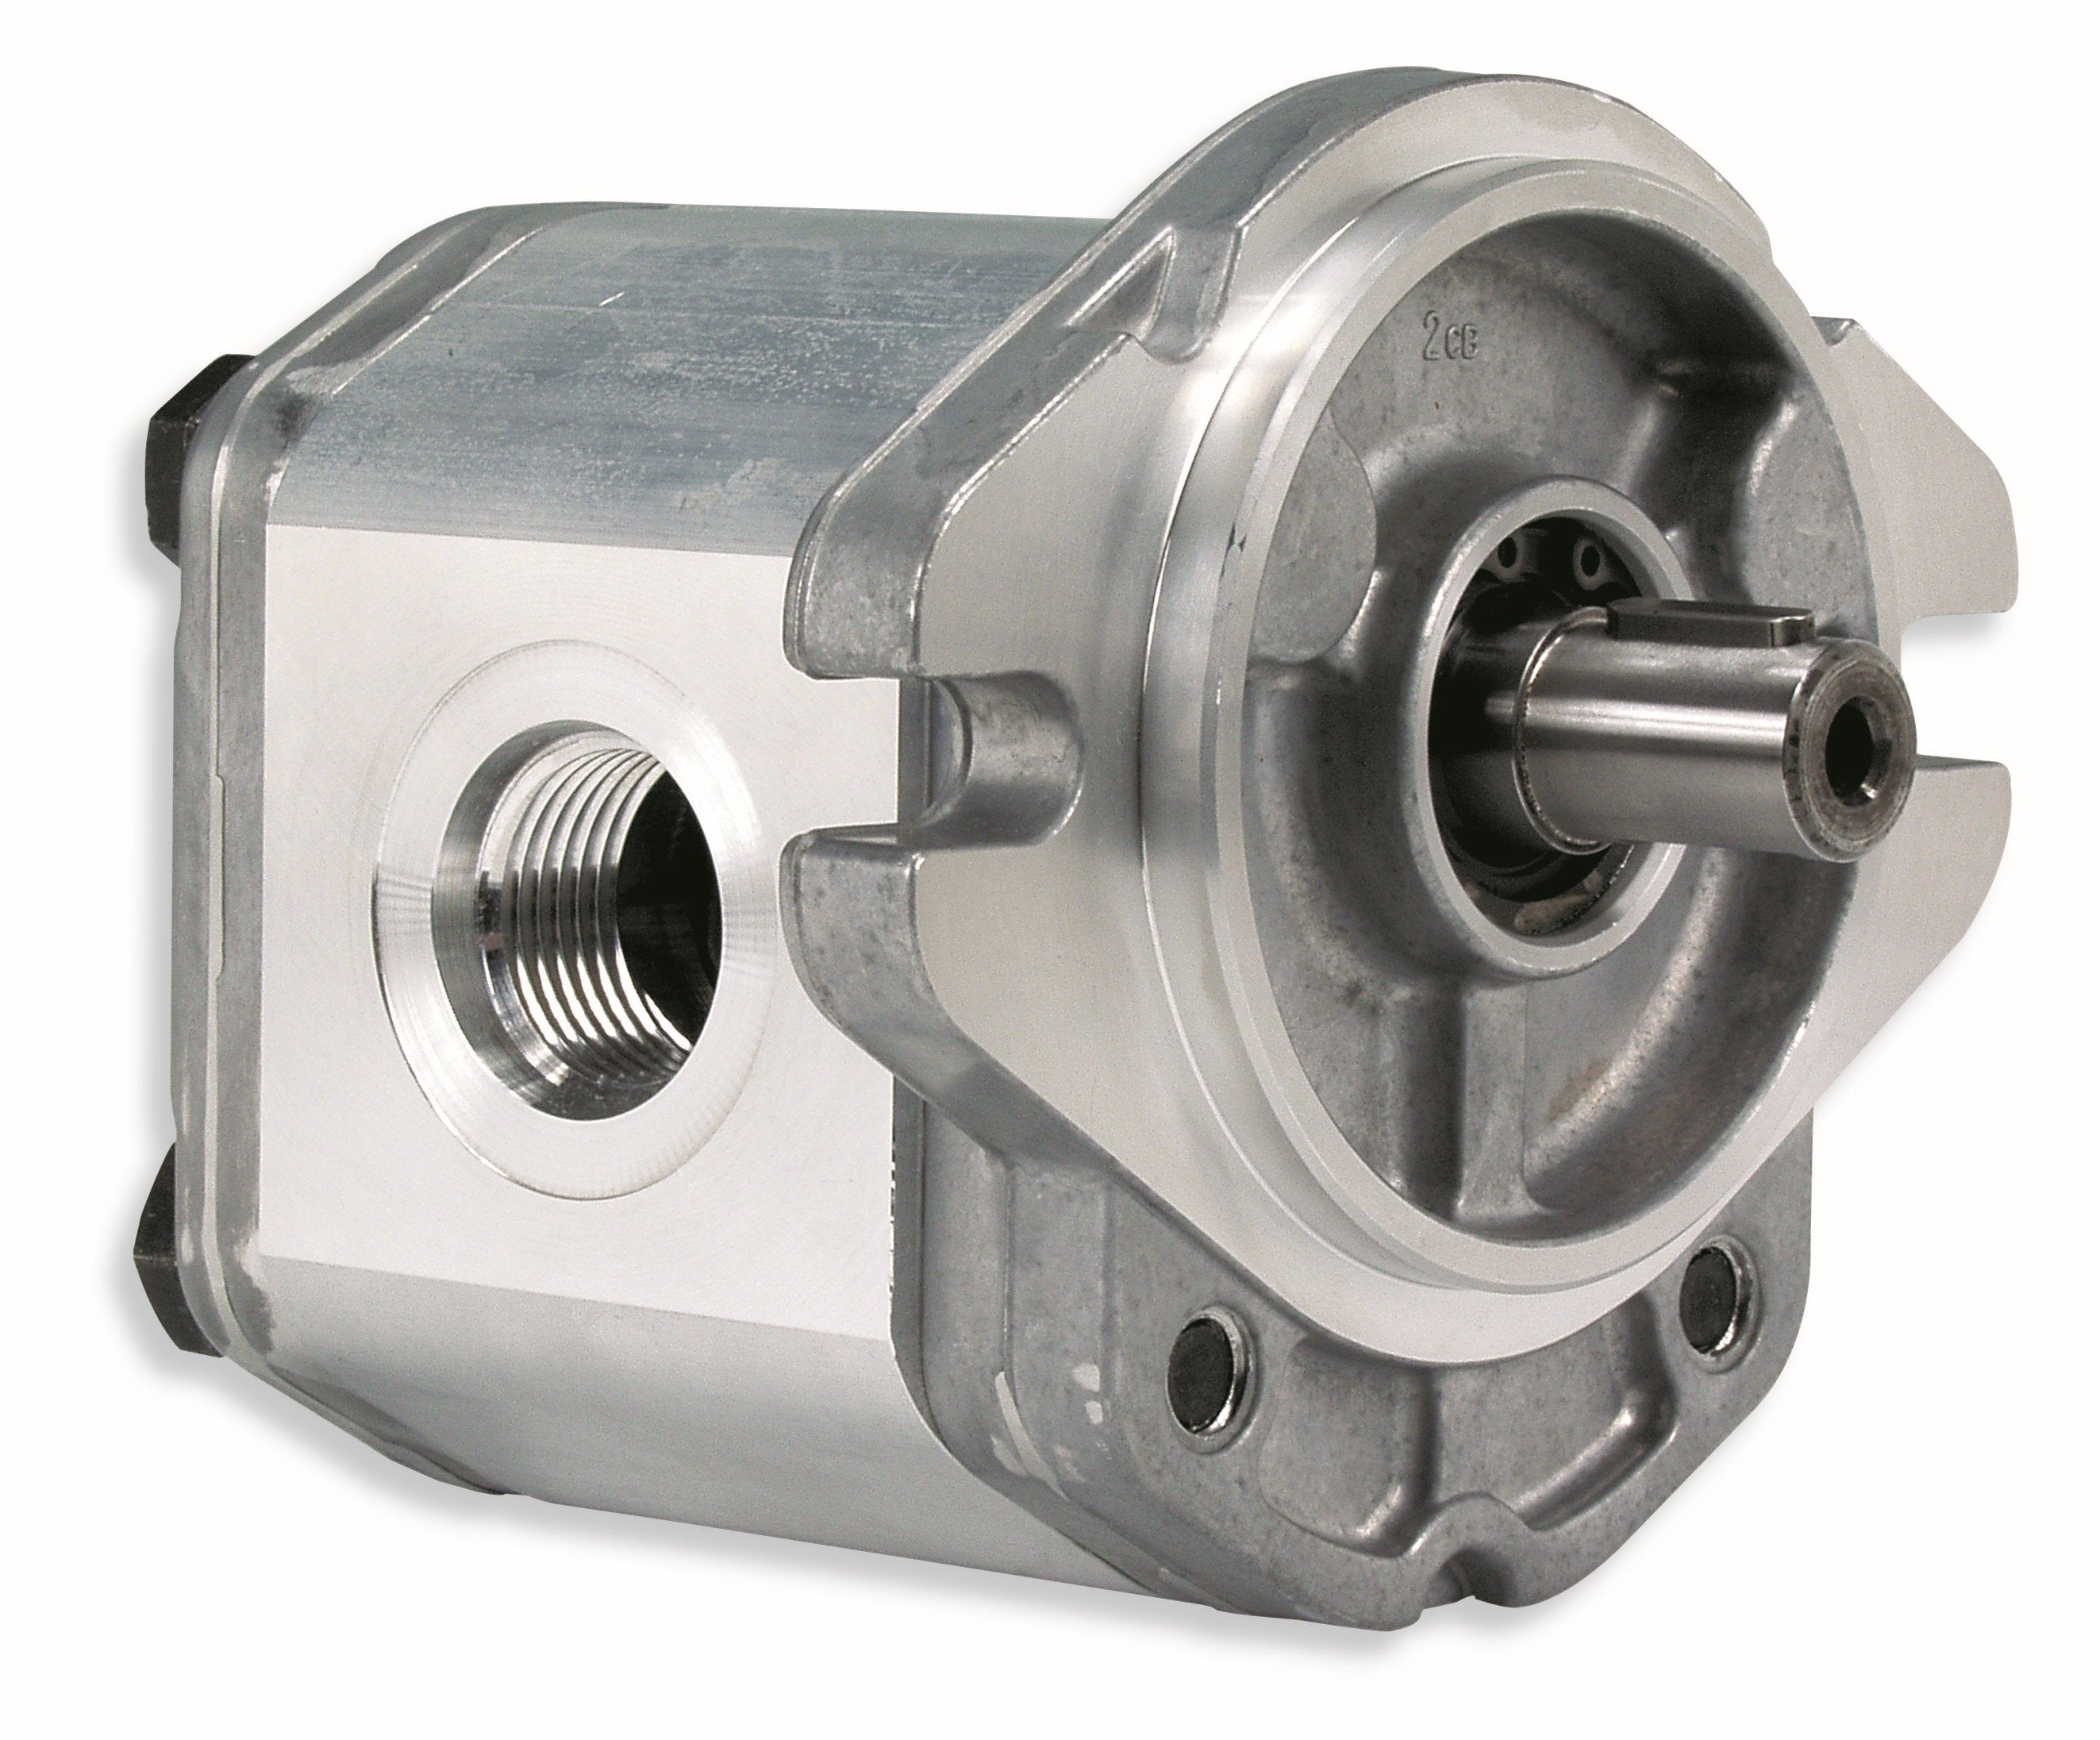 GHM3A-R-135-E4 : Marzocchi Gear Motor, Bidirectional, 87cc, 2320psi rated, 2000RPM, 1.25" Code 61 ports, 7/8" Bore x 1/4" Keyed Shaft